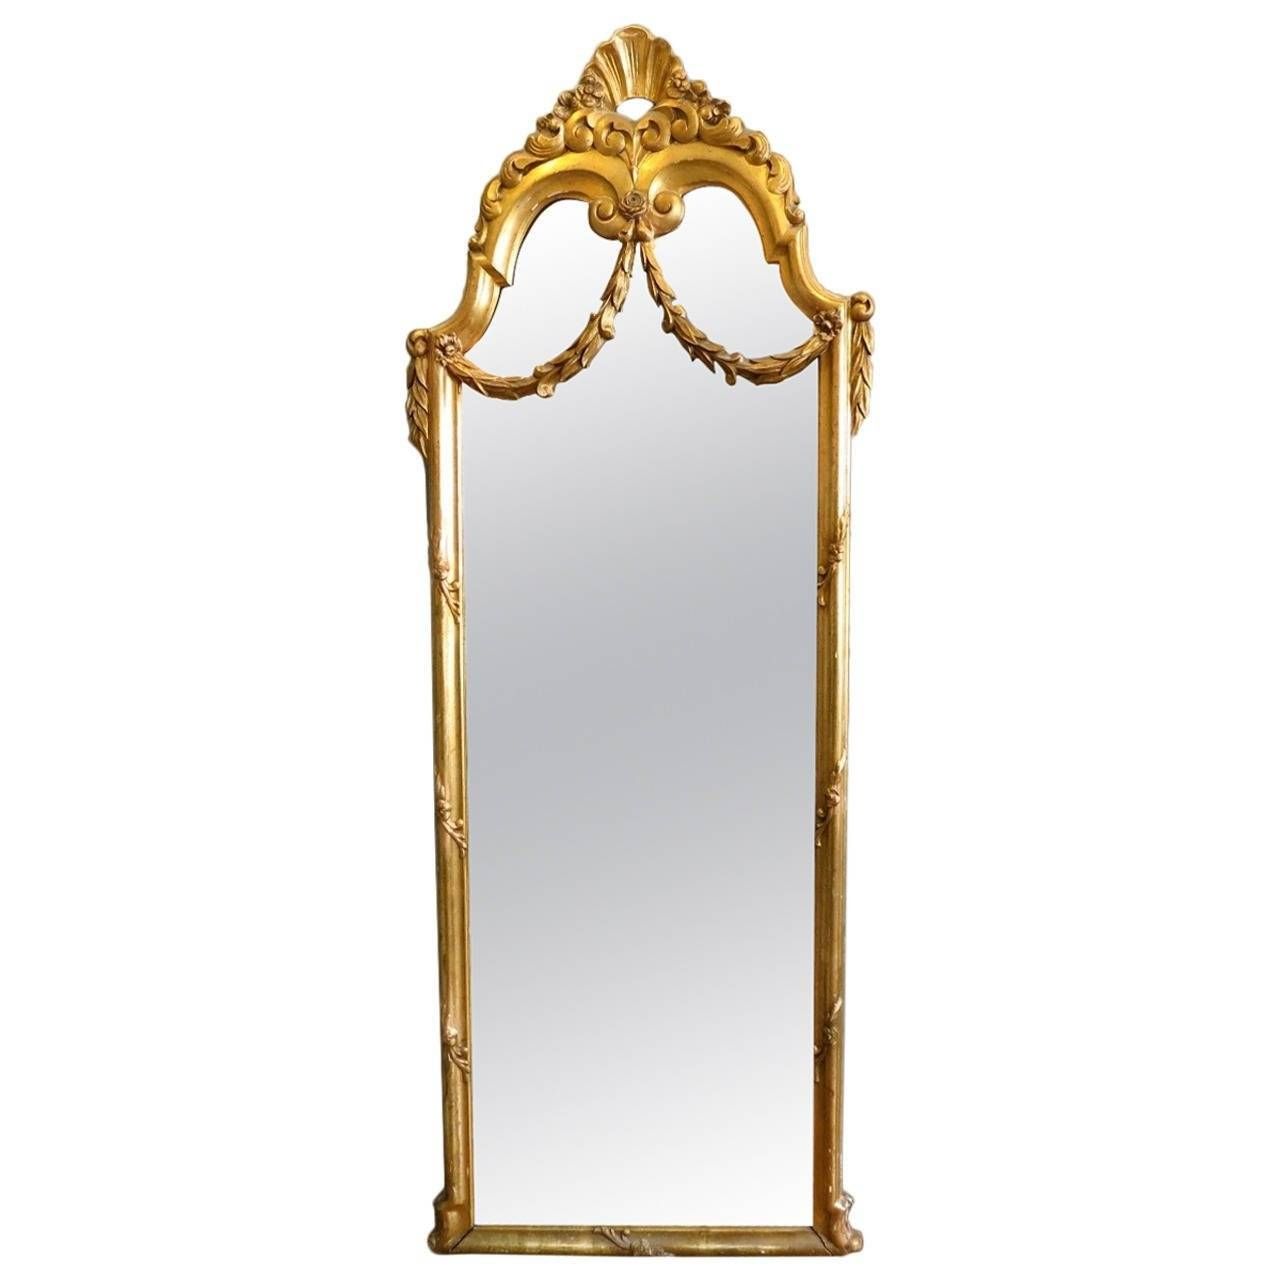 Antique French Gold Gilt Floor Standing Mirror At 1stdibs With Gold Gilt Mirrors (View 9 of 15)